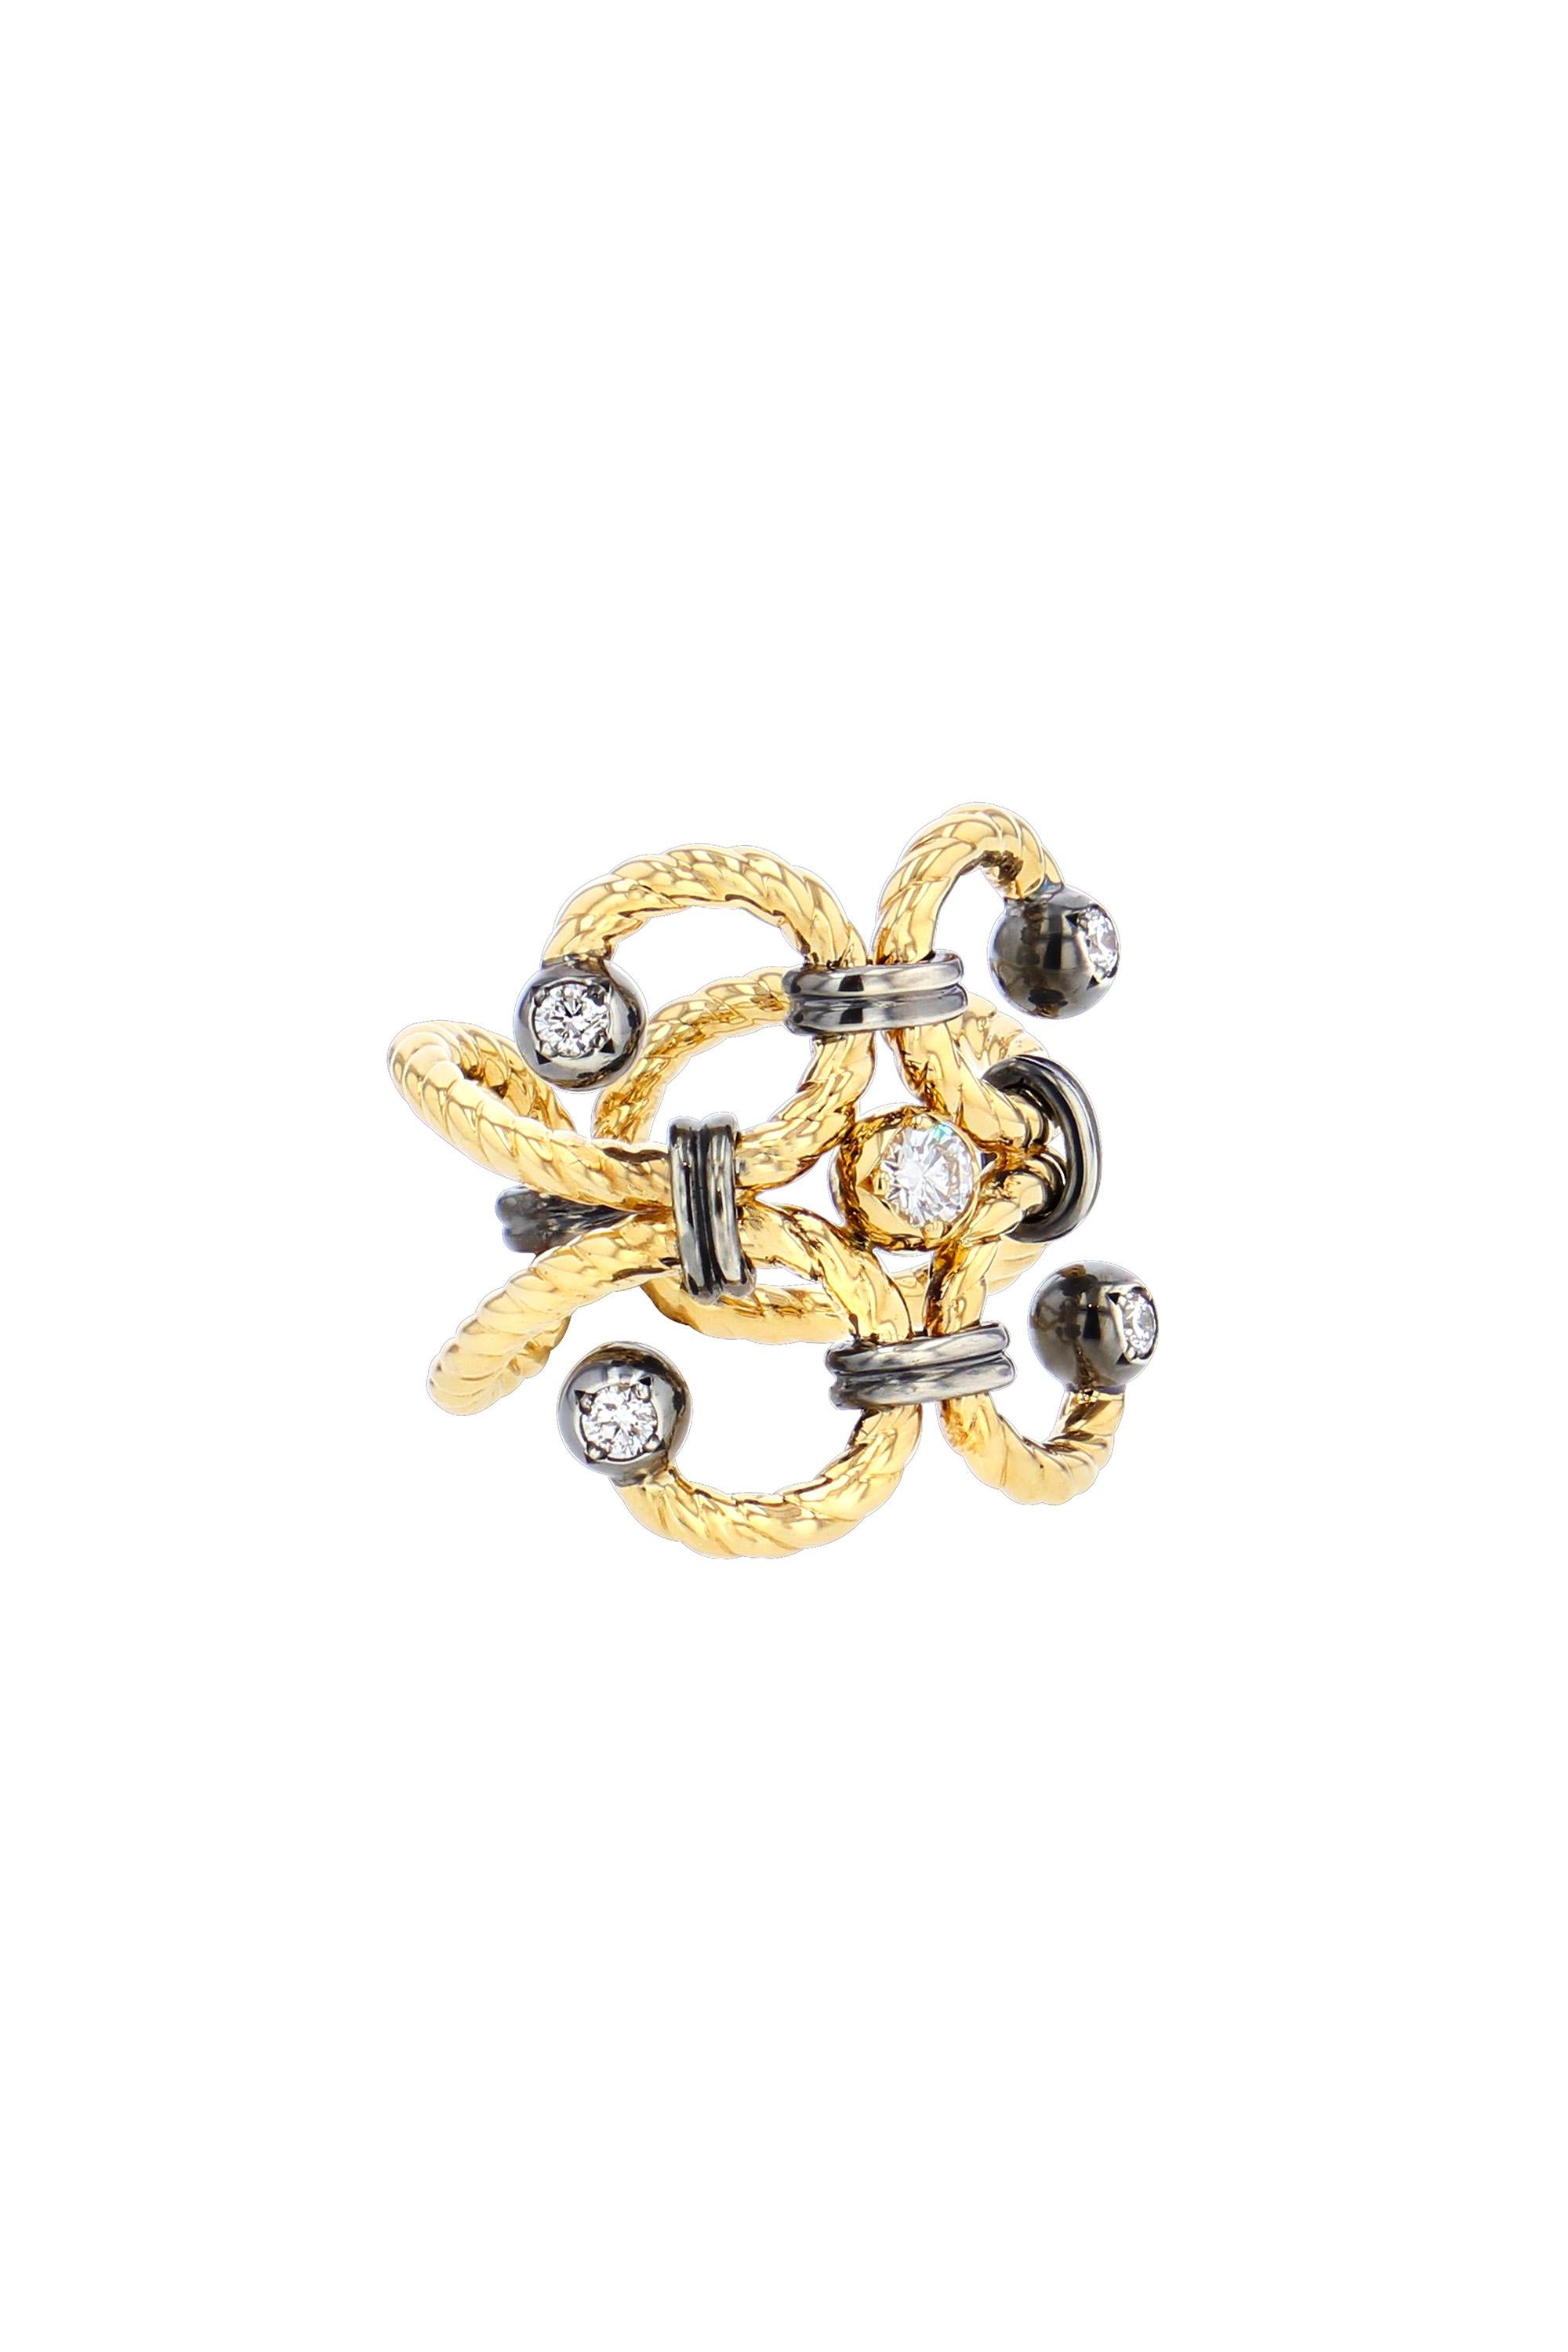 Ring of two yellow gold serpentine twists punctuated with a ball of gold and distressed silver and set with a diamond held by a set of distressed silver rings.

Details:
GVS Diamonds: 0.3 cts
18k Yellow Gold : 9 g
925 Distressed Silver : 2.30 g
Made